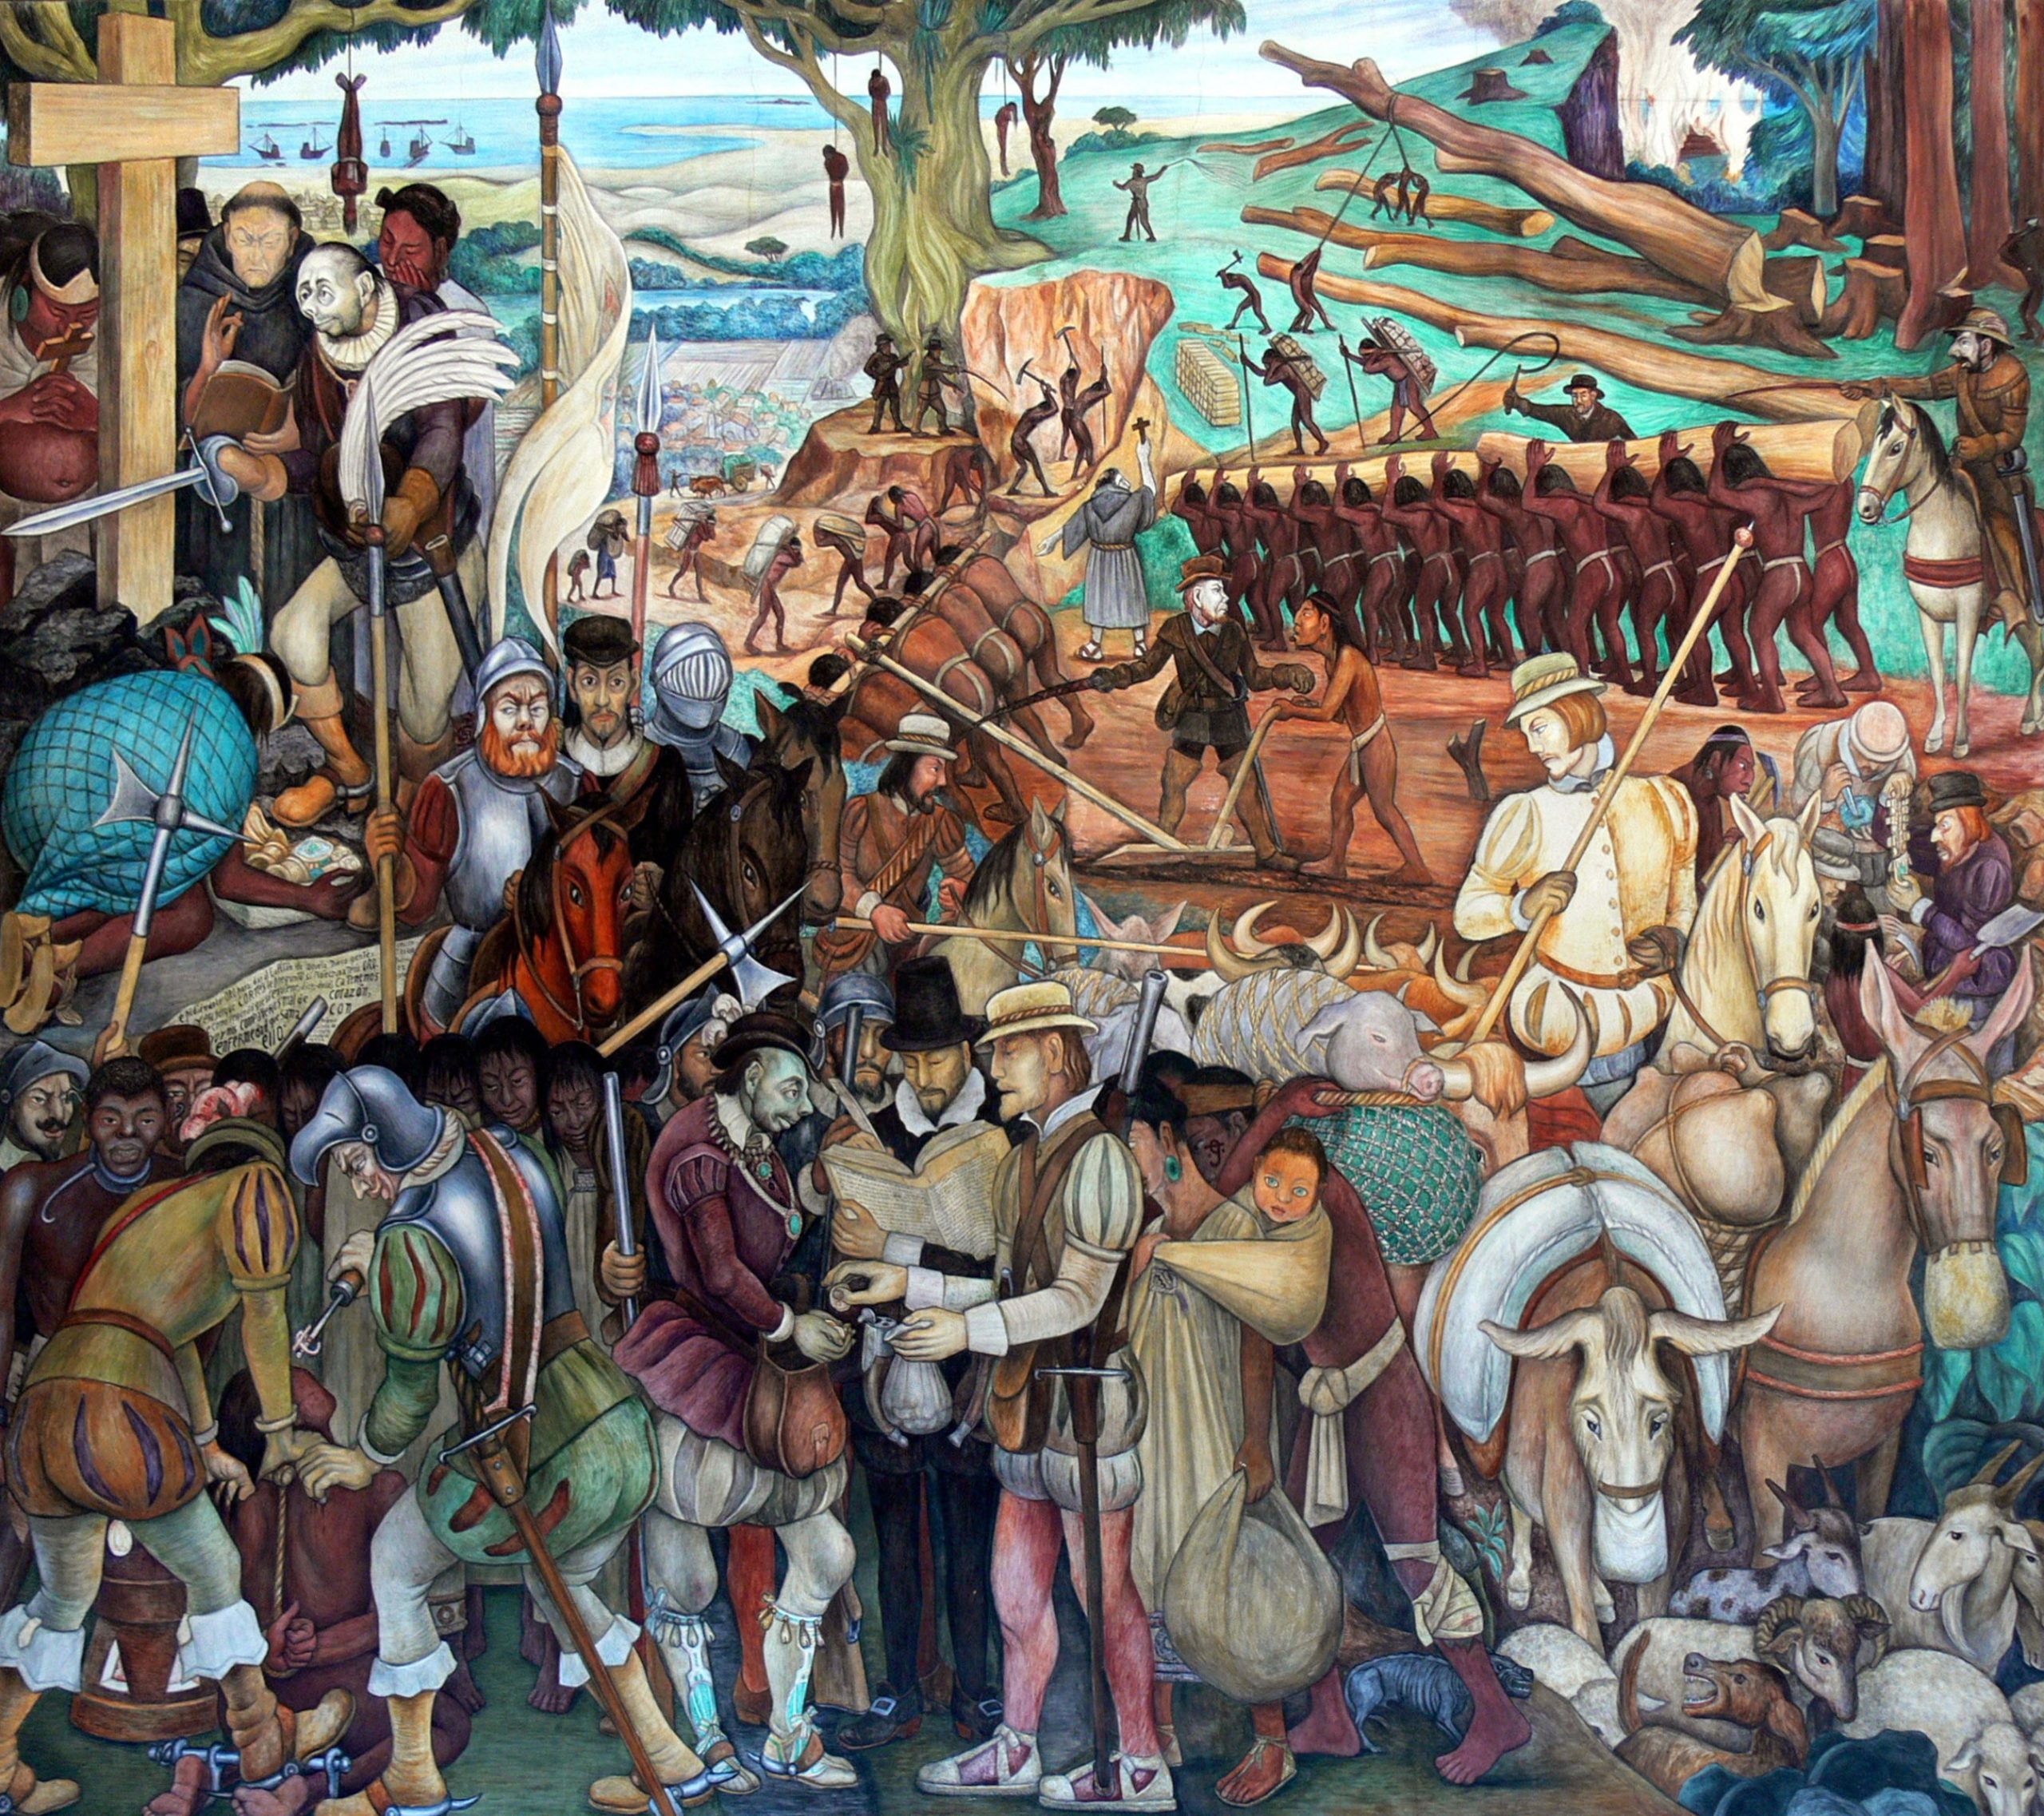 A detail of Diego Rivera's mural in the Palacio Nacional de México. In the background are Spanish galleons in a harbor and a valley with a lake and cultivated fields. To the right, a stepped pyramid is engulfed in flames and smoke. From background to foreground, indigenous men in loincloths are depicted as being hanged, carrying heavy loads of lumber from a denuded hillside, working with pickaxes, serving as pack animals to pull a plow under the supervision of armed European men, who are dressed in doublets and jerkins and some, in armor. Some of them are on horseback. Sheep, oxen, pigs, and dogs are driven through the street. At the left, an indigenous man holds a cross and prays before a larger cross. Beside him stands a priest with an open Bible; a well-dressed and plumed indigenous man kneels before him with a tribute of gold. A shackled African man is held in a kneeling position by two European men, one of whom holds a branding iron, while a second African man, wearing an iron collar on his neck, looks on. The conquistador Hernán Cortés is in the center foreground, looking sick and pale; a European man pays him the tribute received from the native inhabitants of the land while another European man writes a record of the transaction in a book. An indigenous woman, La Malinche, with large jade earrings and a green-eyed baby on her back serves as interpreter.